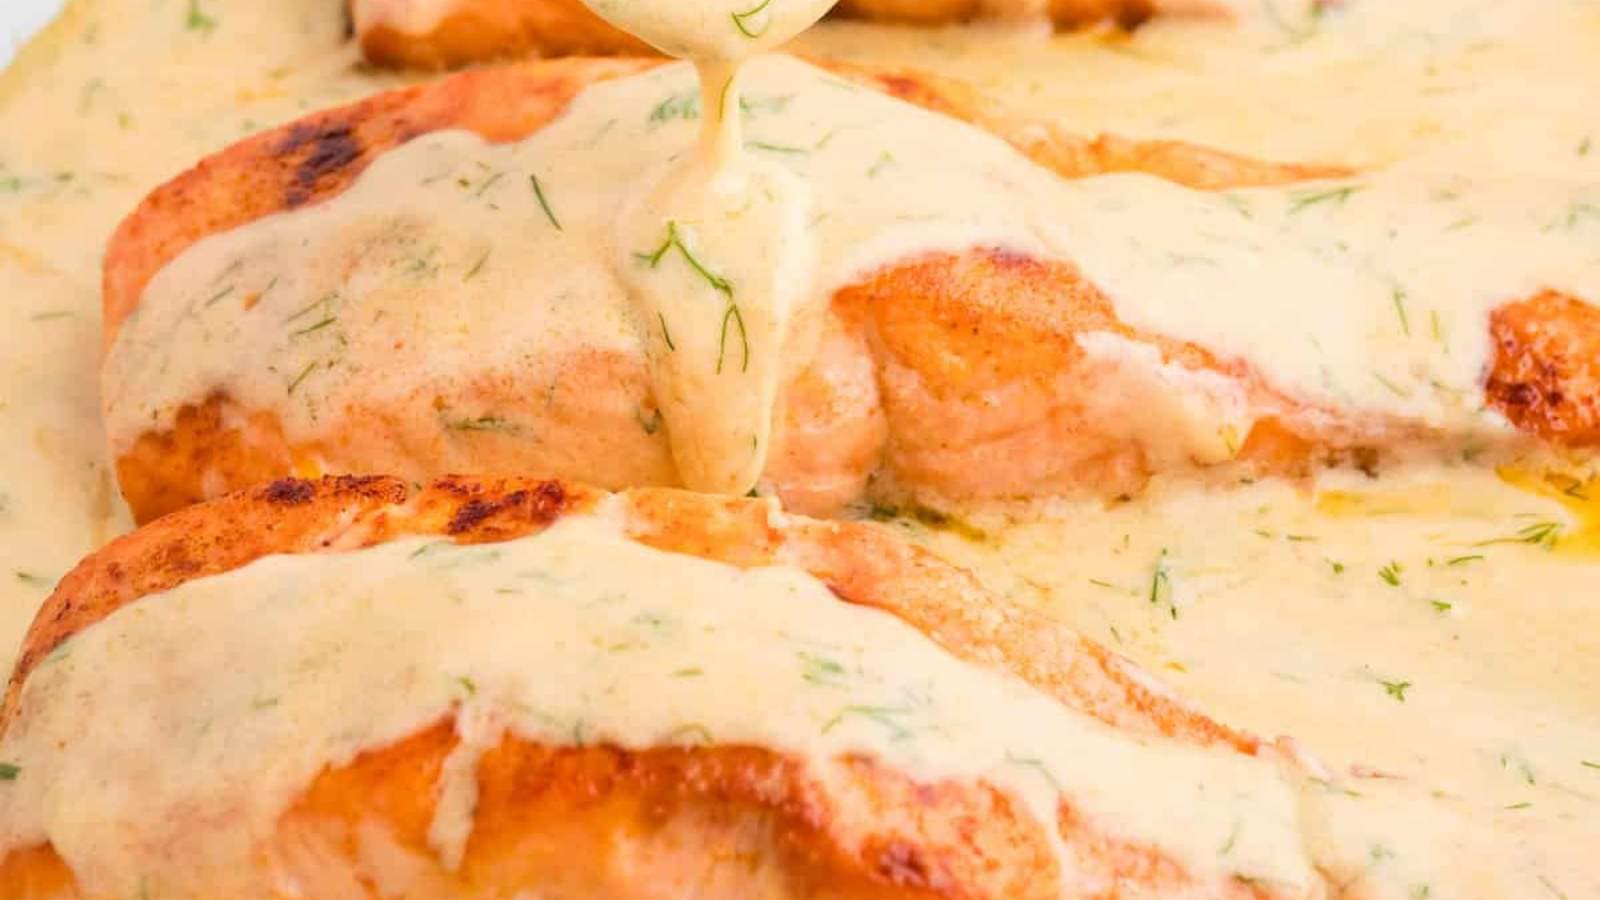 Salmon With Dill Cream Sauce recipe by Love From The Table.